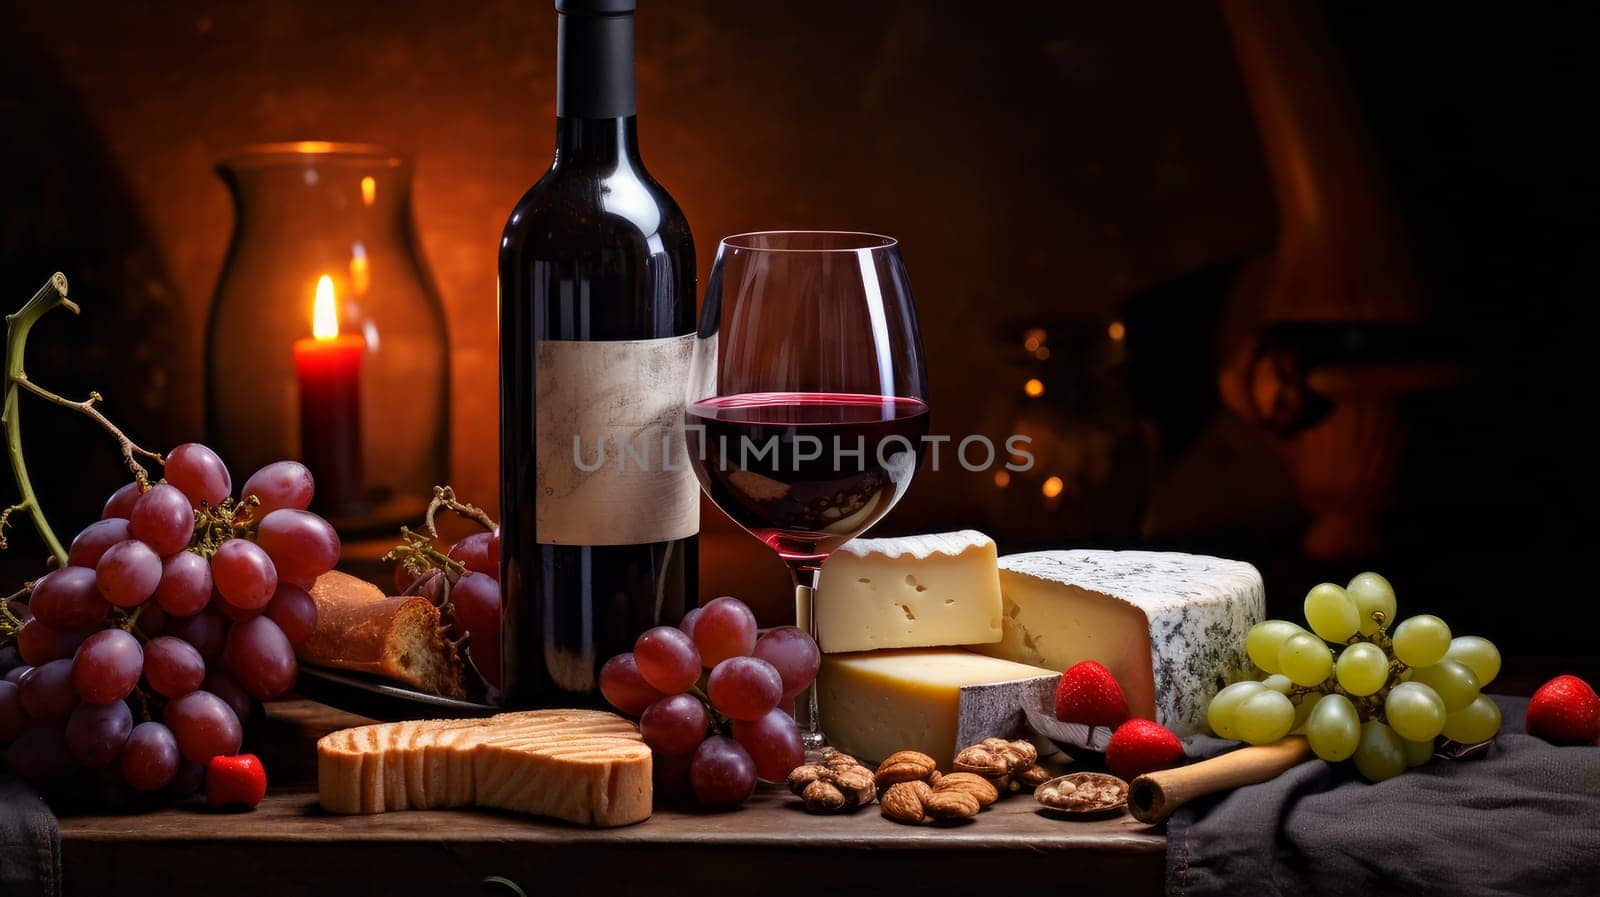 Refined still life with red wine, cheese and grapes on a wicker tray on a wooden table on a dark background. by Alla_Yurtayeva